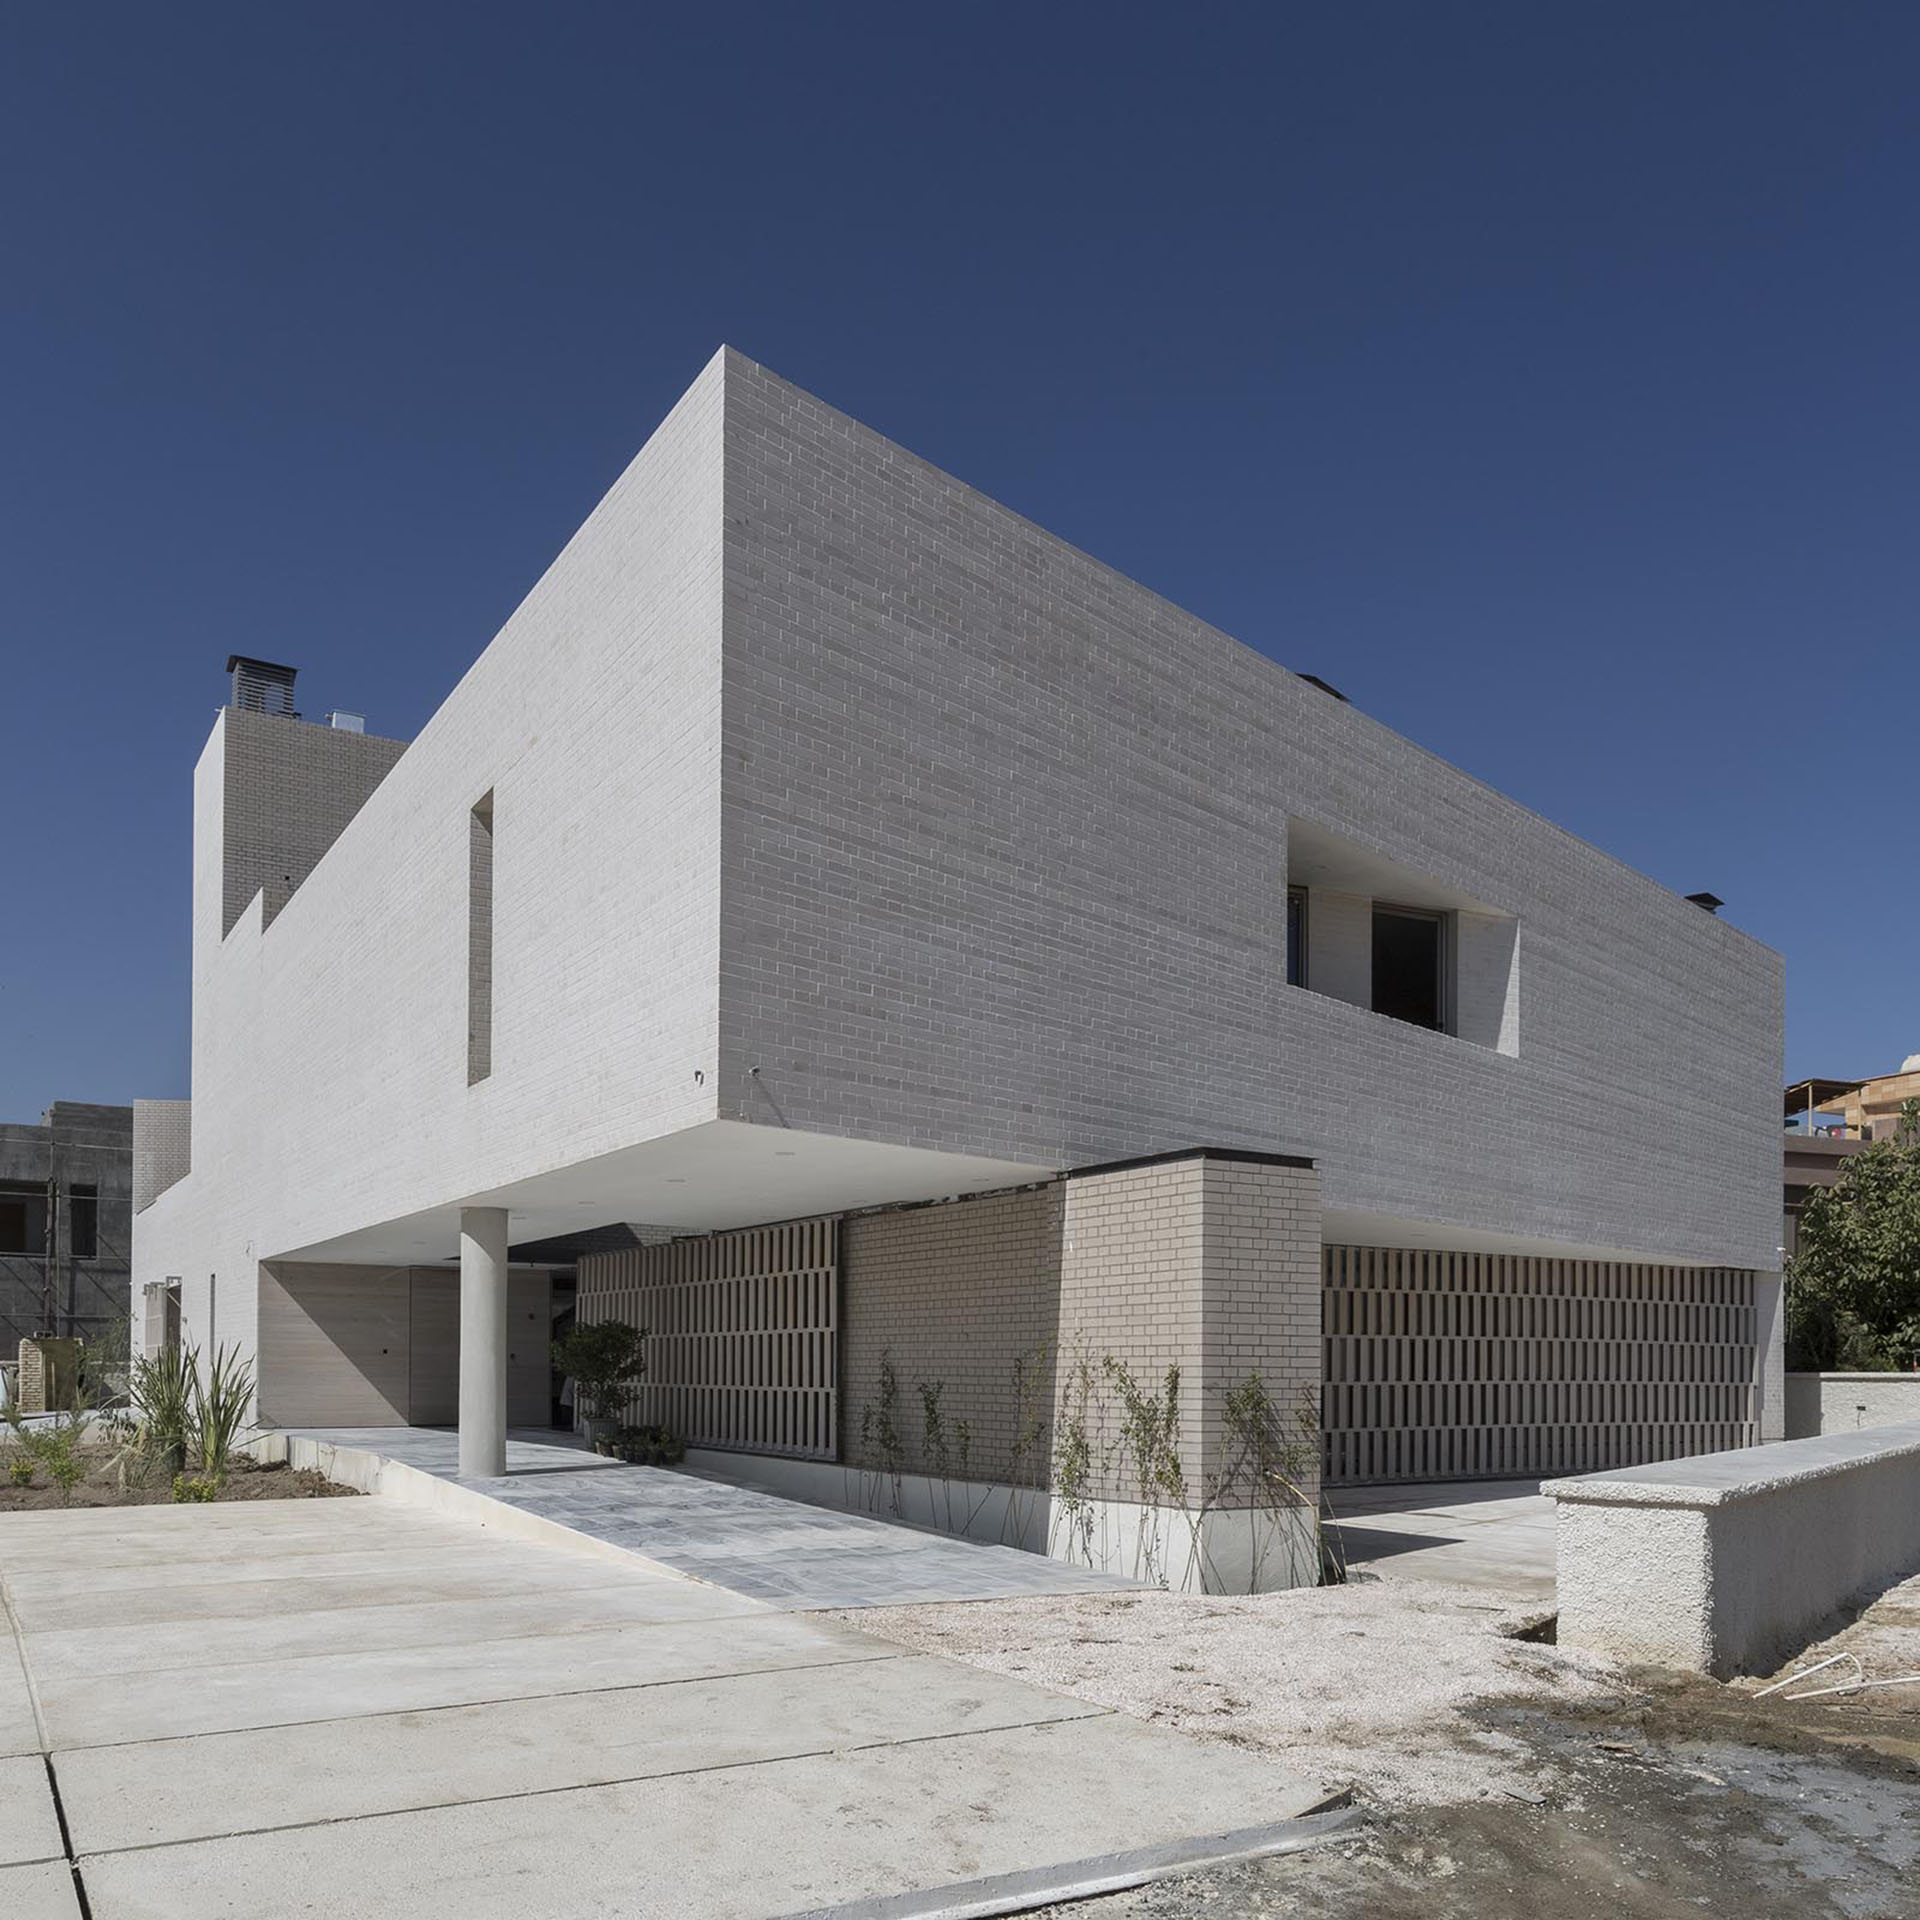 <p>While ensuring privacy from the exterior, the concrete and brick secondary residence blurs the distinction between inside and outside through the use of courtyards.</p>